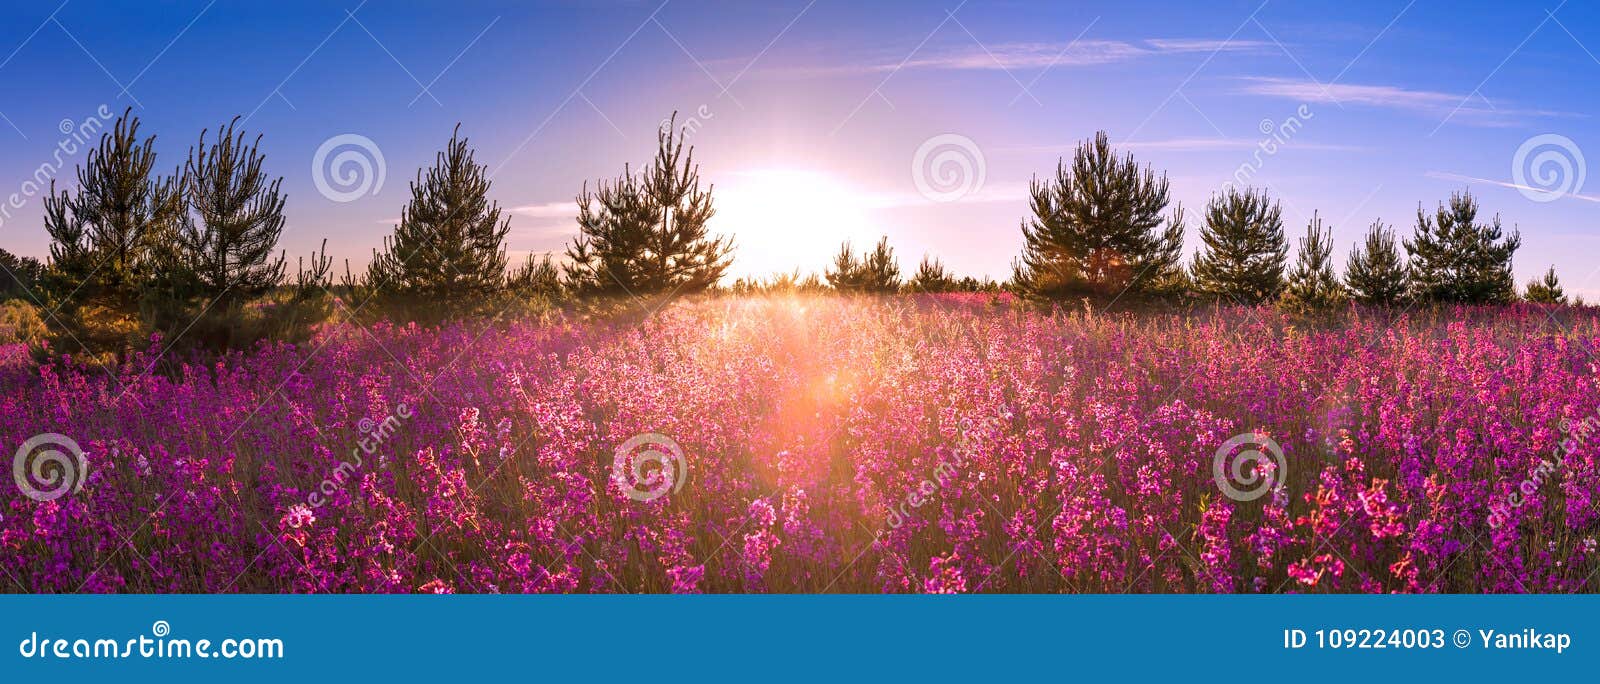 summer landscape with the blossoming meadow, sunrise